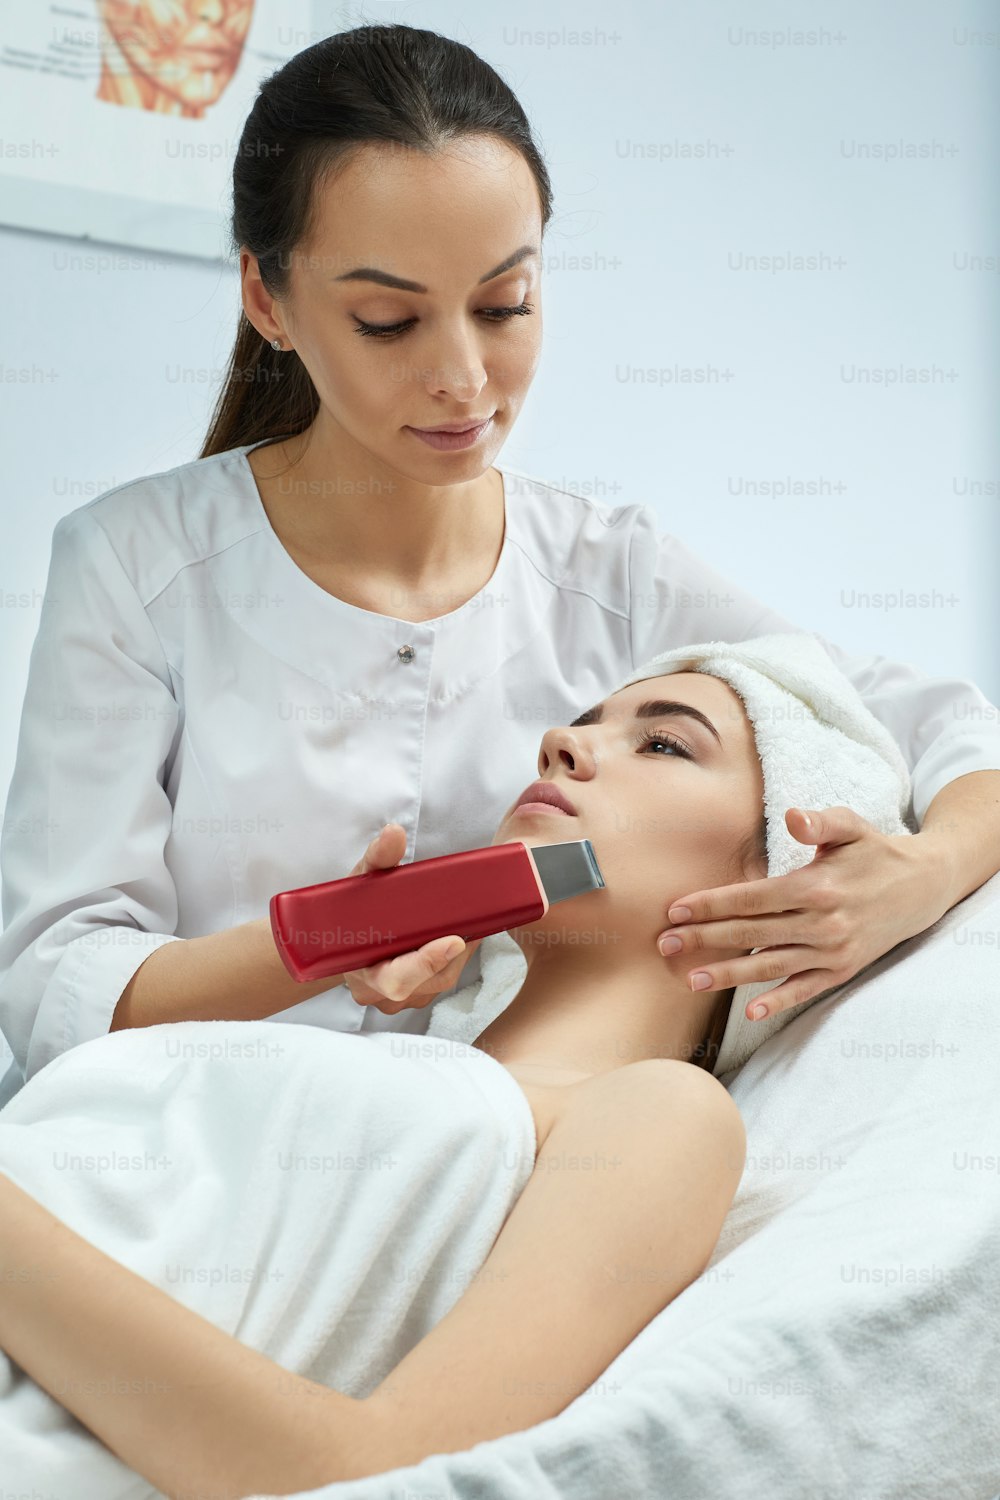 procedure ultrasound cleansing of woman's face, facial peeling. ultrasonic treatment